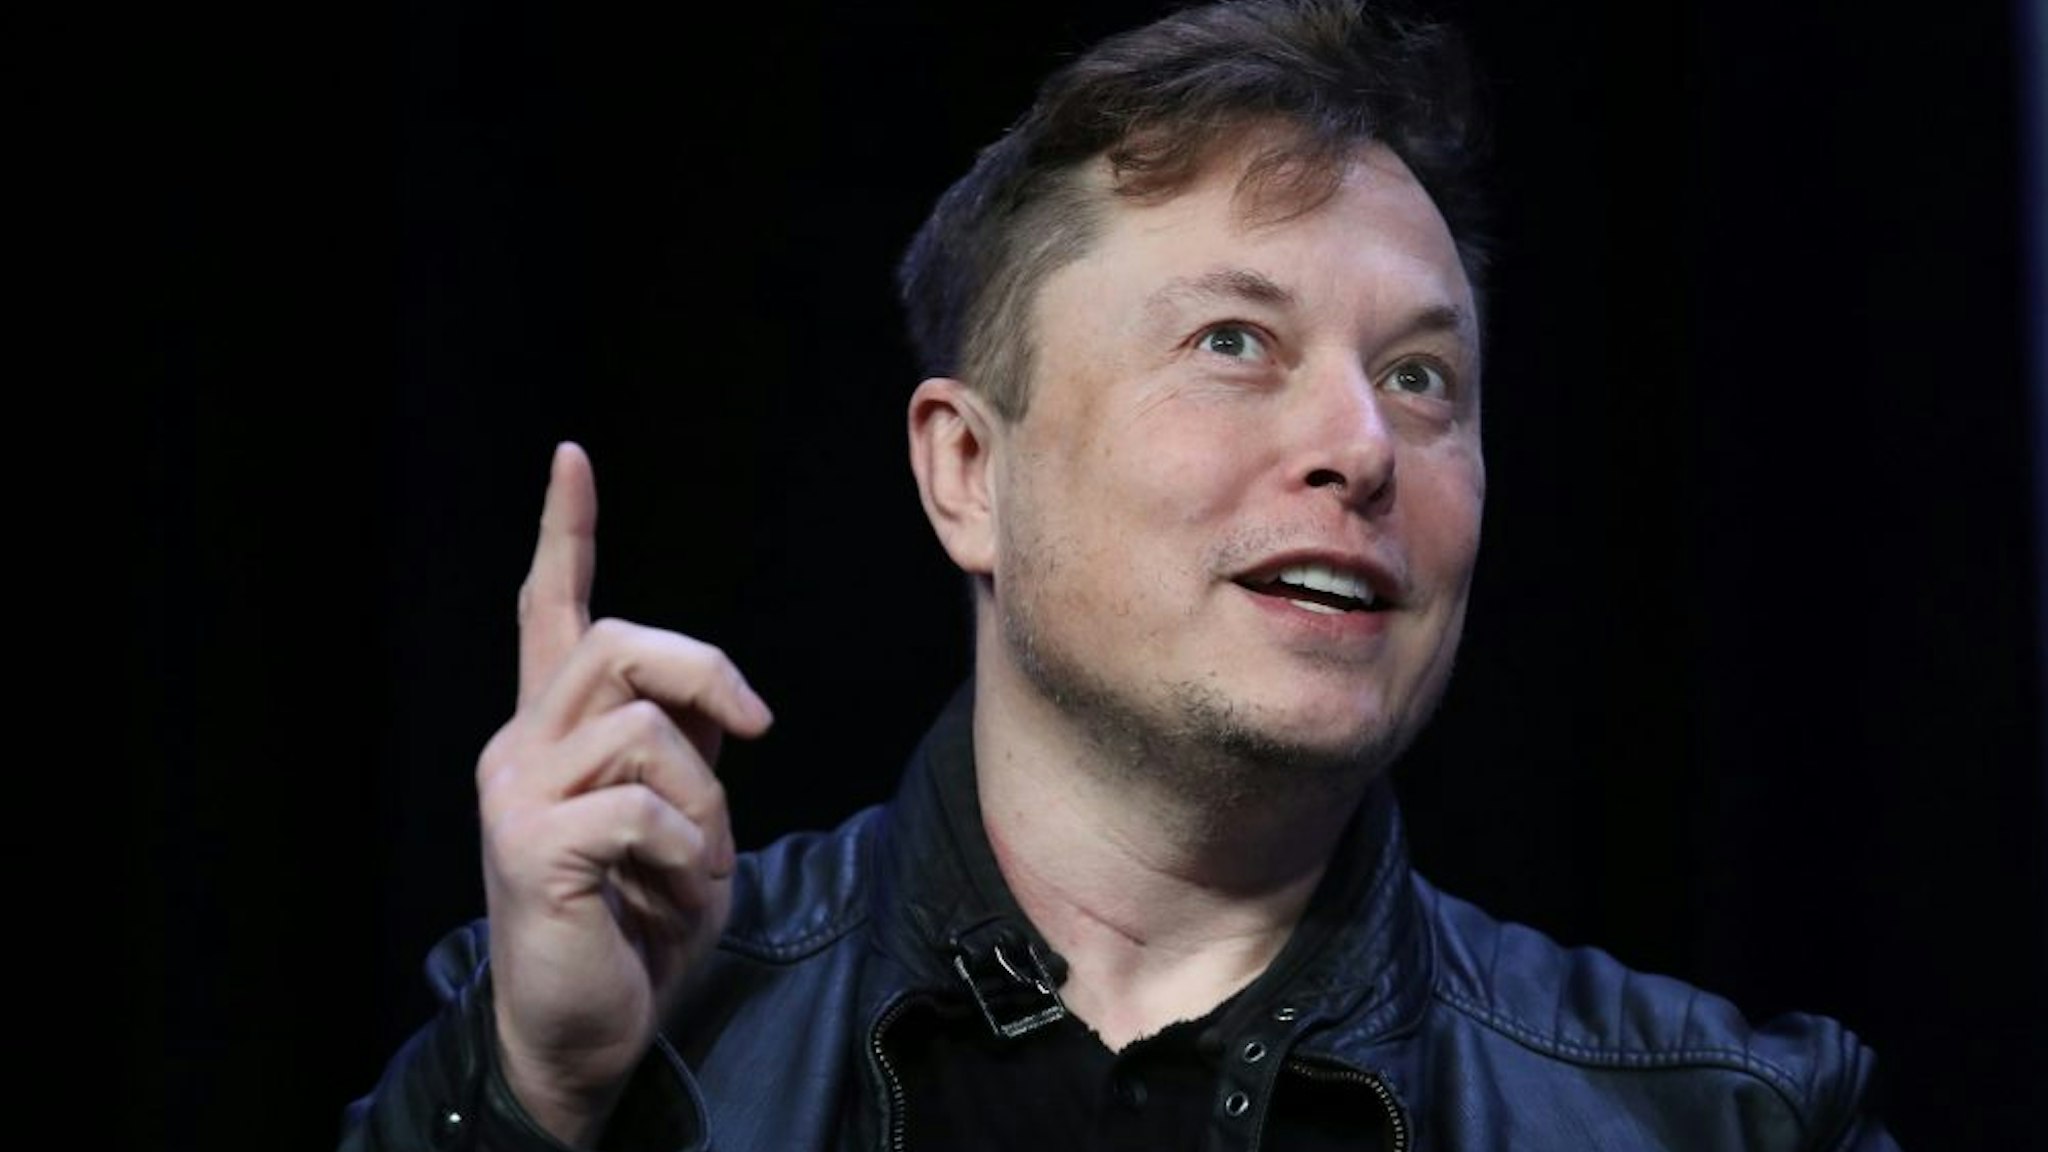 WASHINGTON, DC - MARCH 09: Elon Musk, founder and chief engineer of SpaceX speaks at the 2020 Satellite Conference and Exhibition March 9, 2020 in Washington, DC. Musk answered a range of questions relating to SpaceX projects during his appearance at the conference.